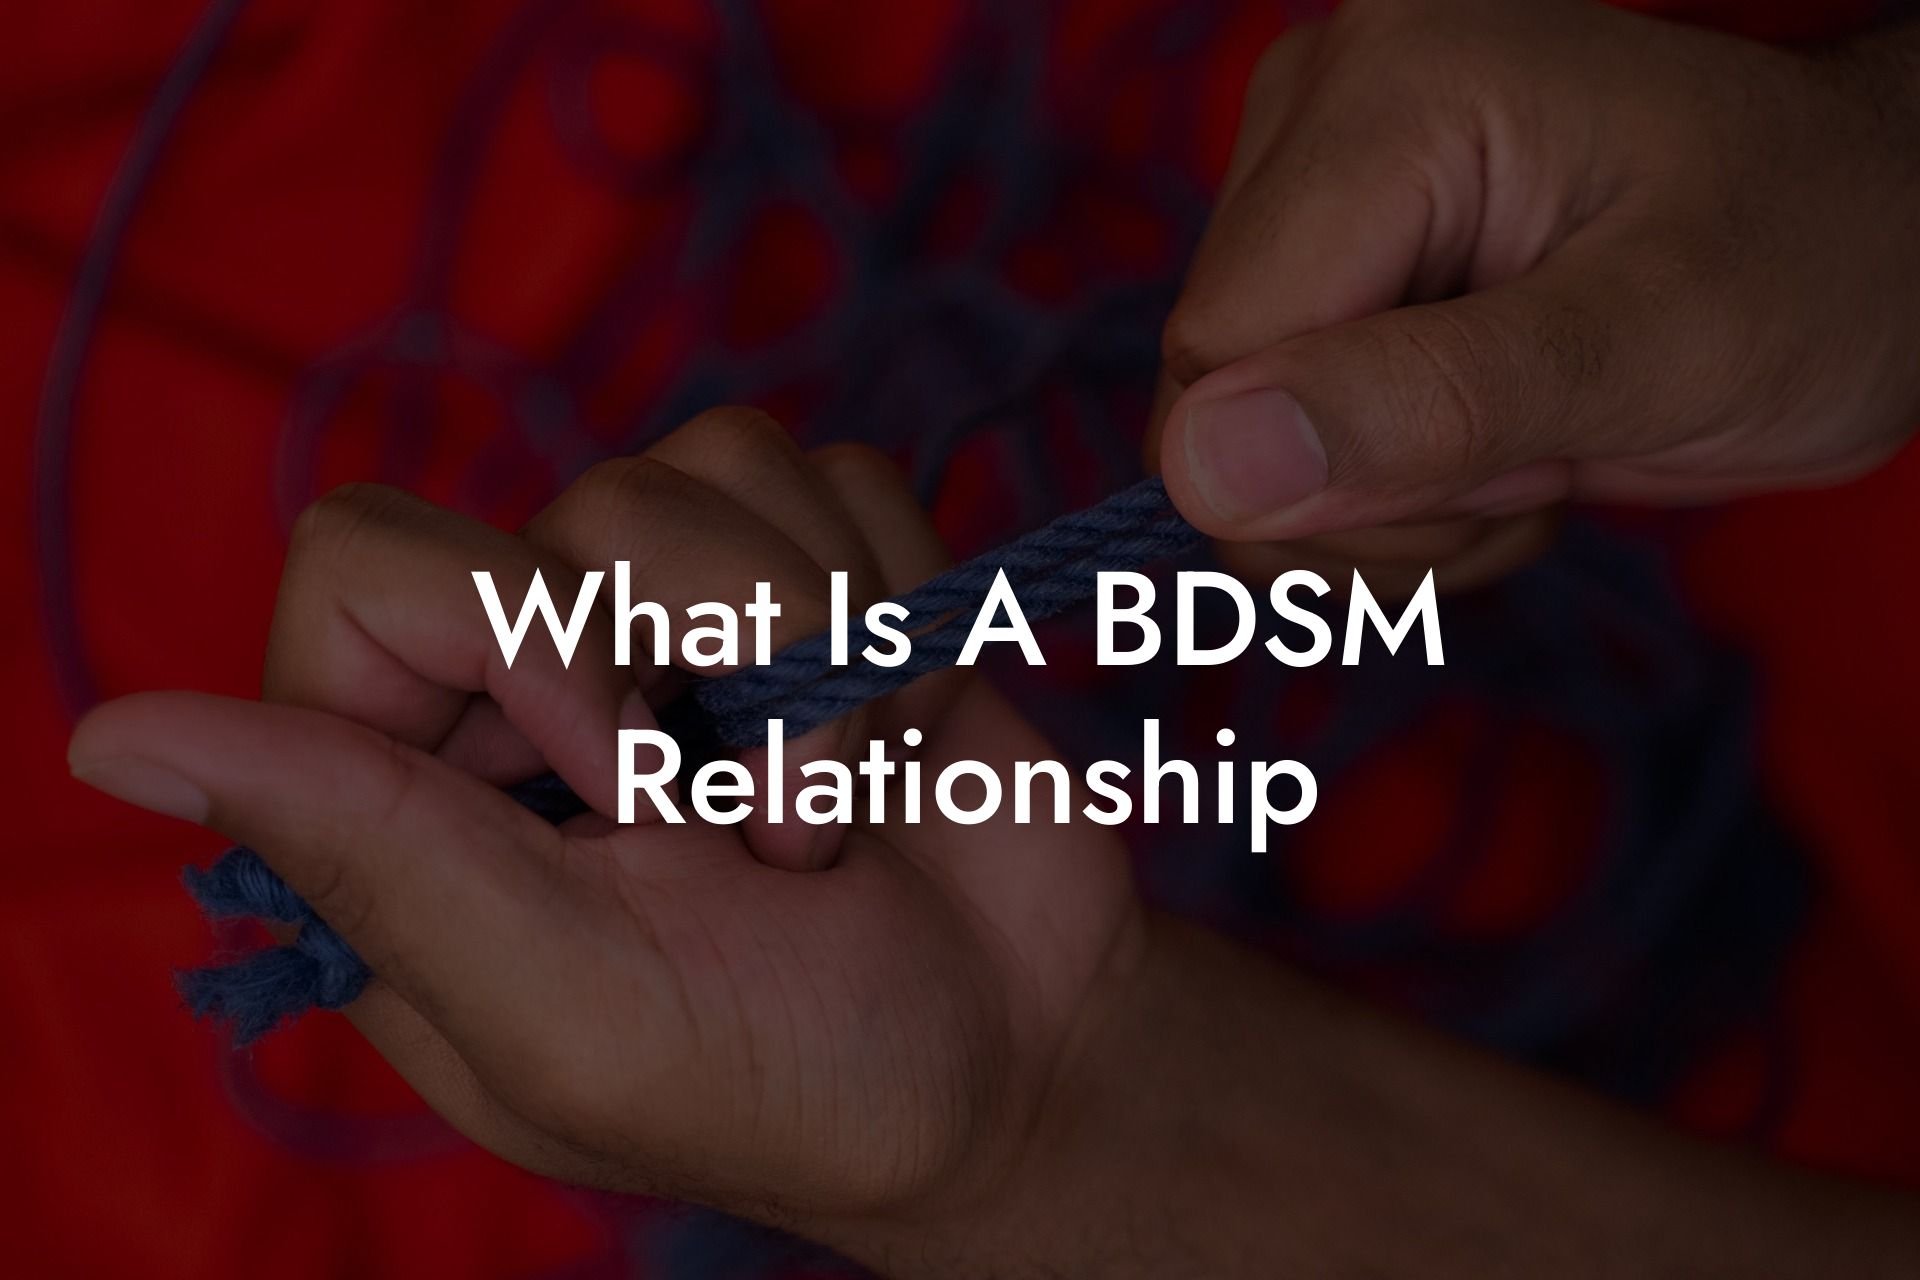 What Is A BDSM Relationship